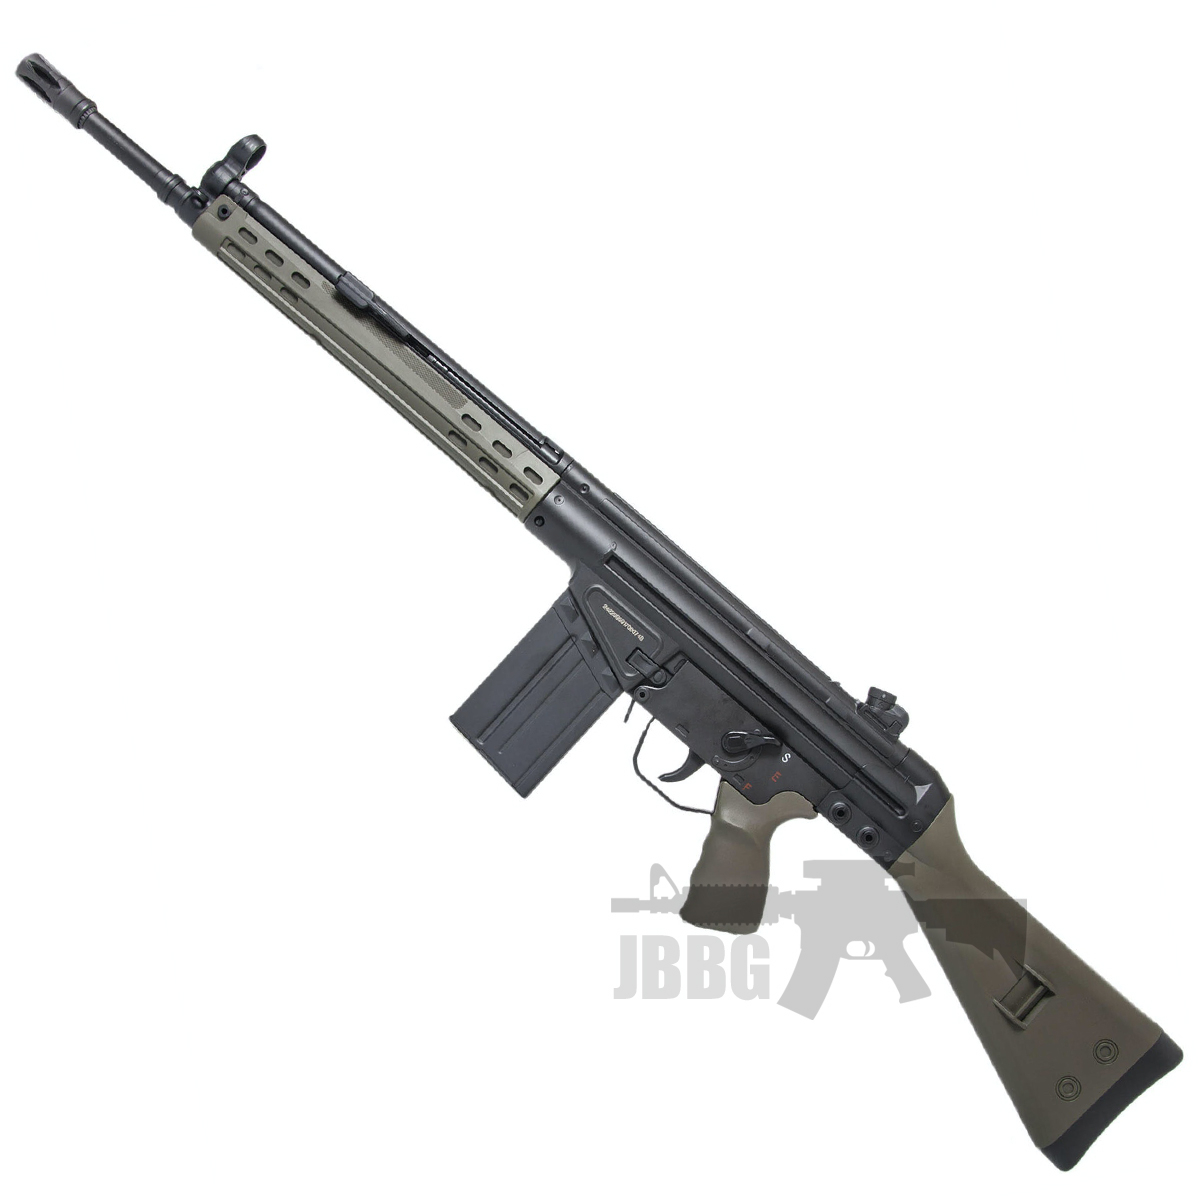 HK WE LICENSED HK G3A3 GBB AIRSOFT RIFLE